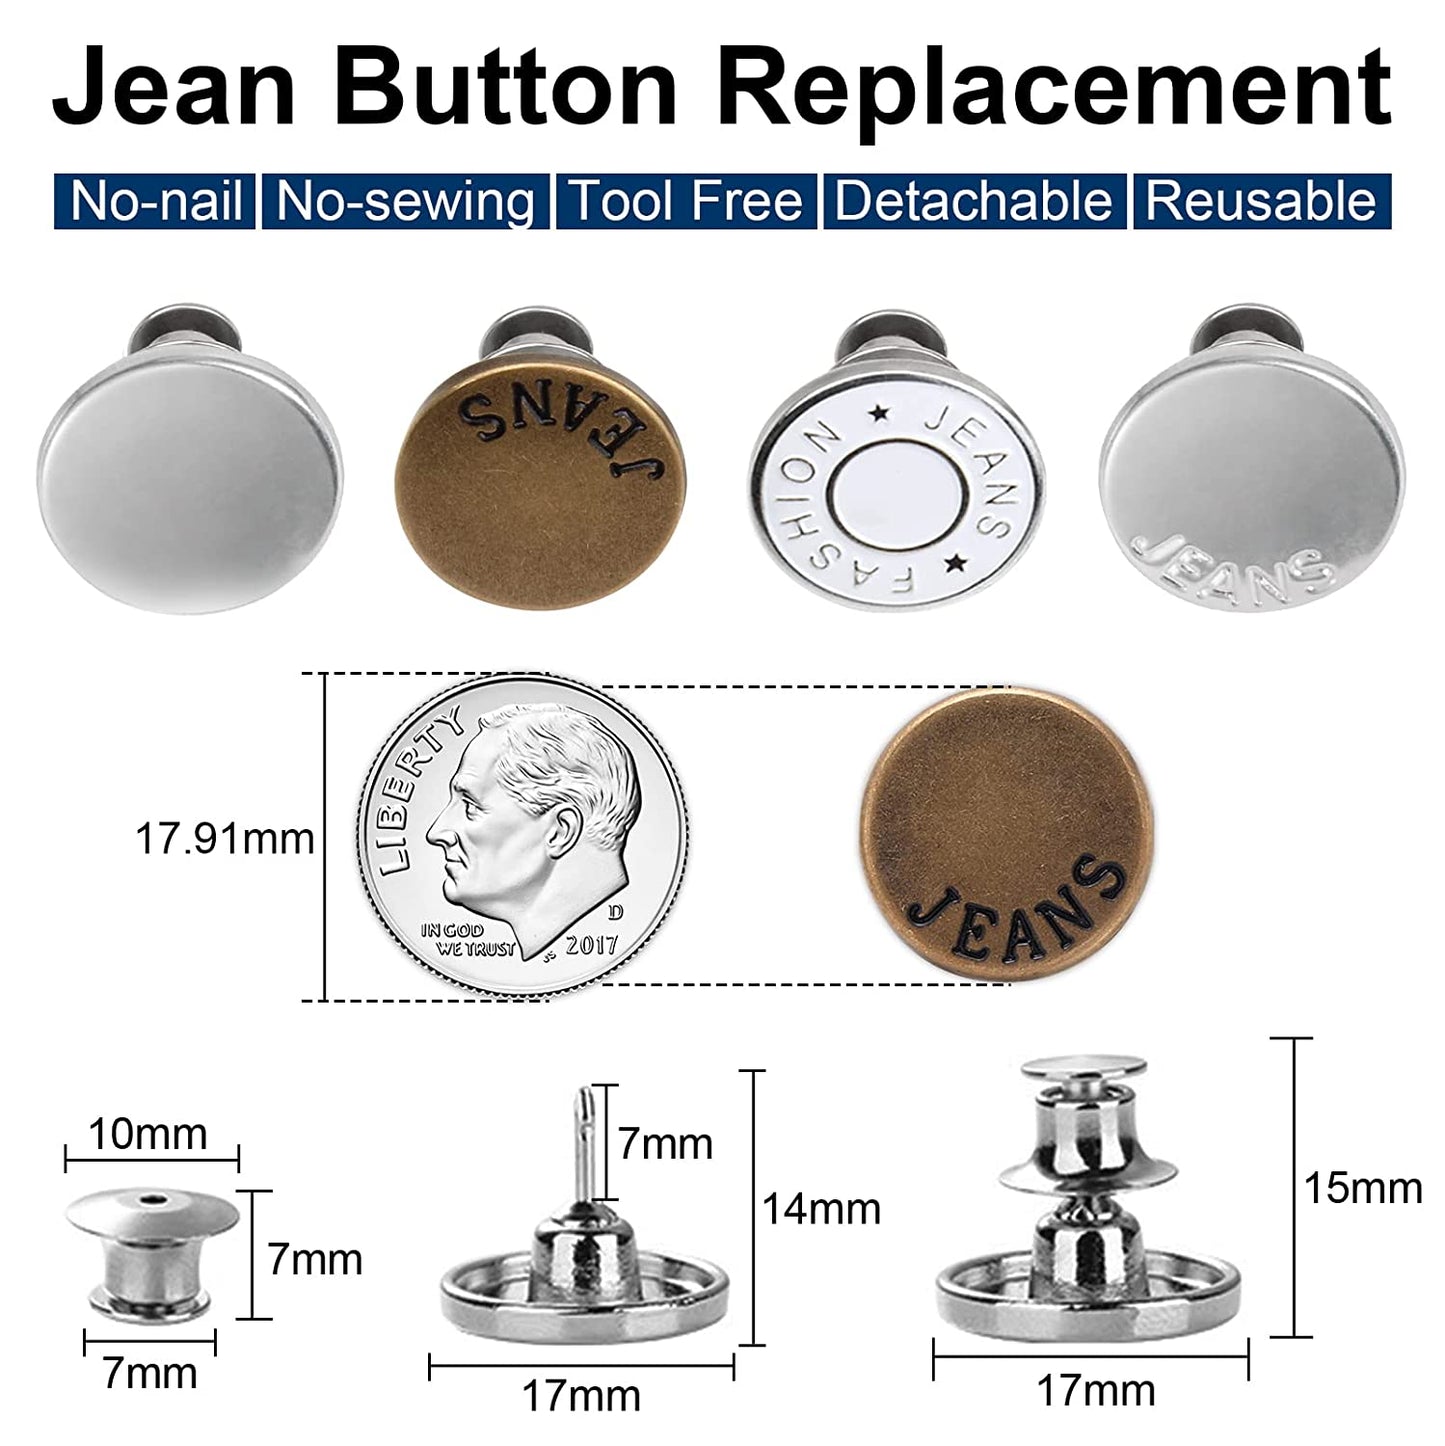 TOOVREN Upgraded 8 Sets Button Pins for Jeans Pants, No Sew Perfect Fit Jean Button Tightener Replacement Adjustable Reusable Metal Clips Snap Tack, Instant Reduce Too Big Pants Waist